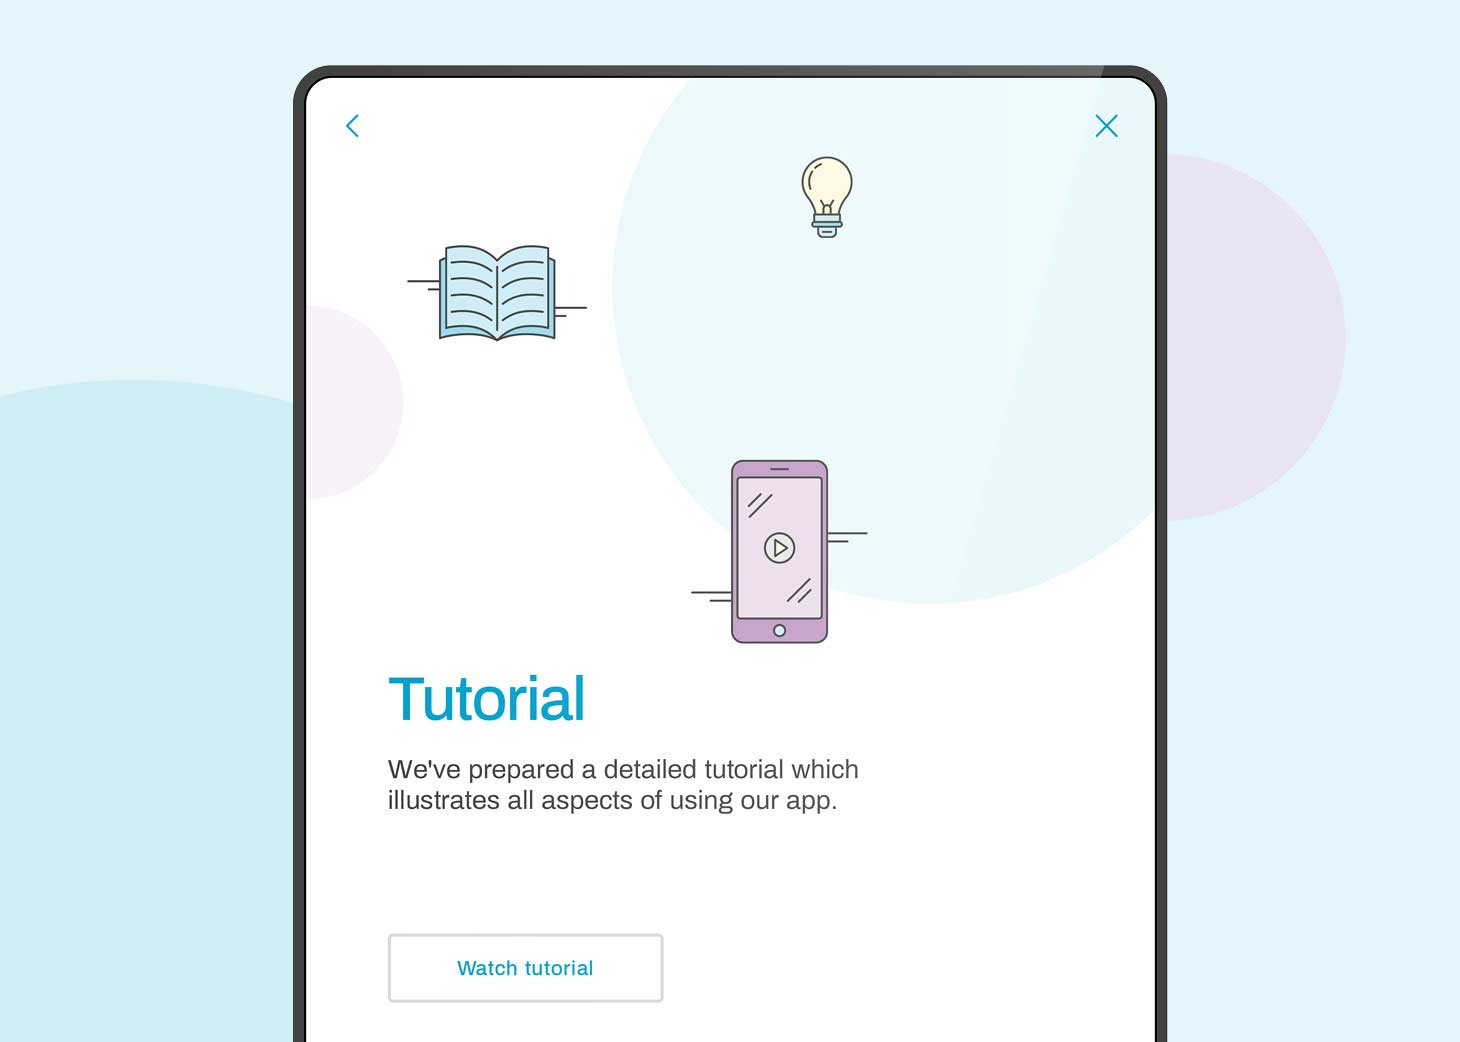 iPad screen with illustrations including light bulb, book and mobile caption "Tutorial".